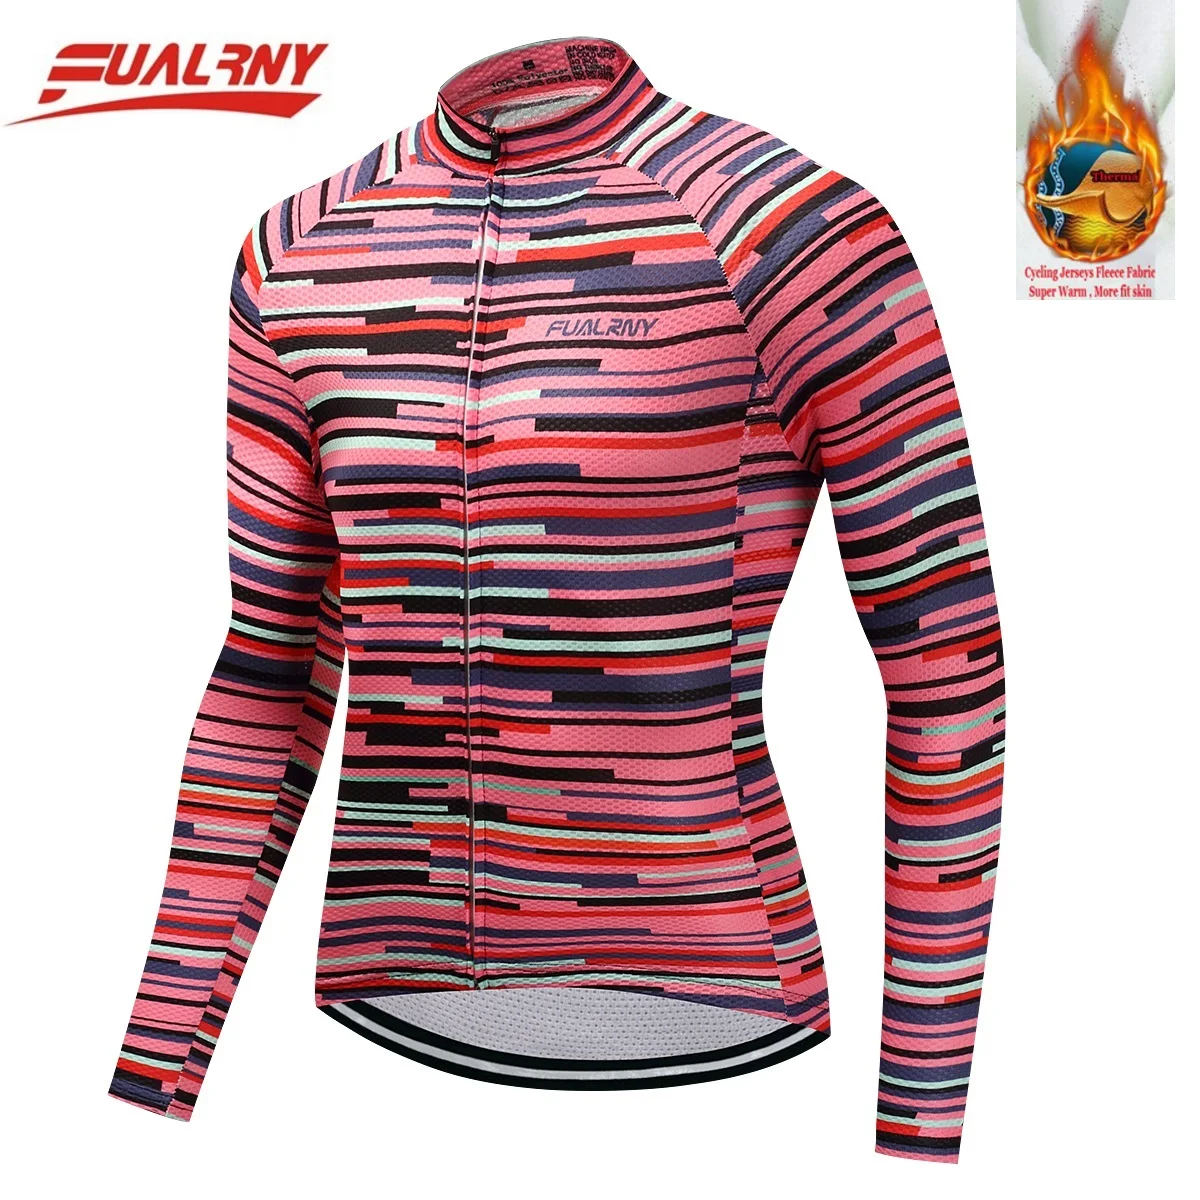 2019 Team FUALRNY Red stripe Long sleeve Ropa Ciclismo Cycling Jersey ...